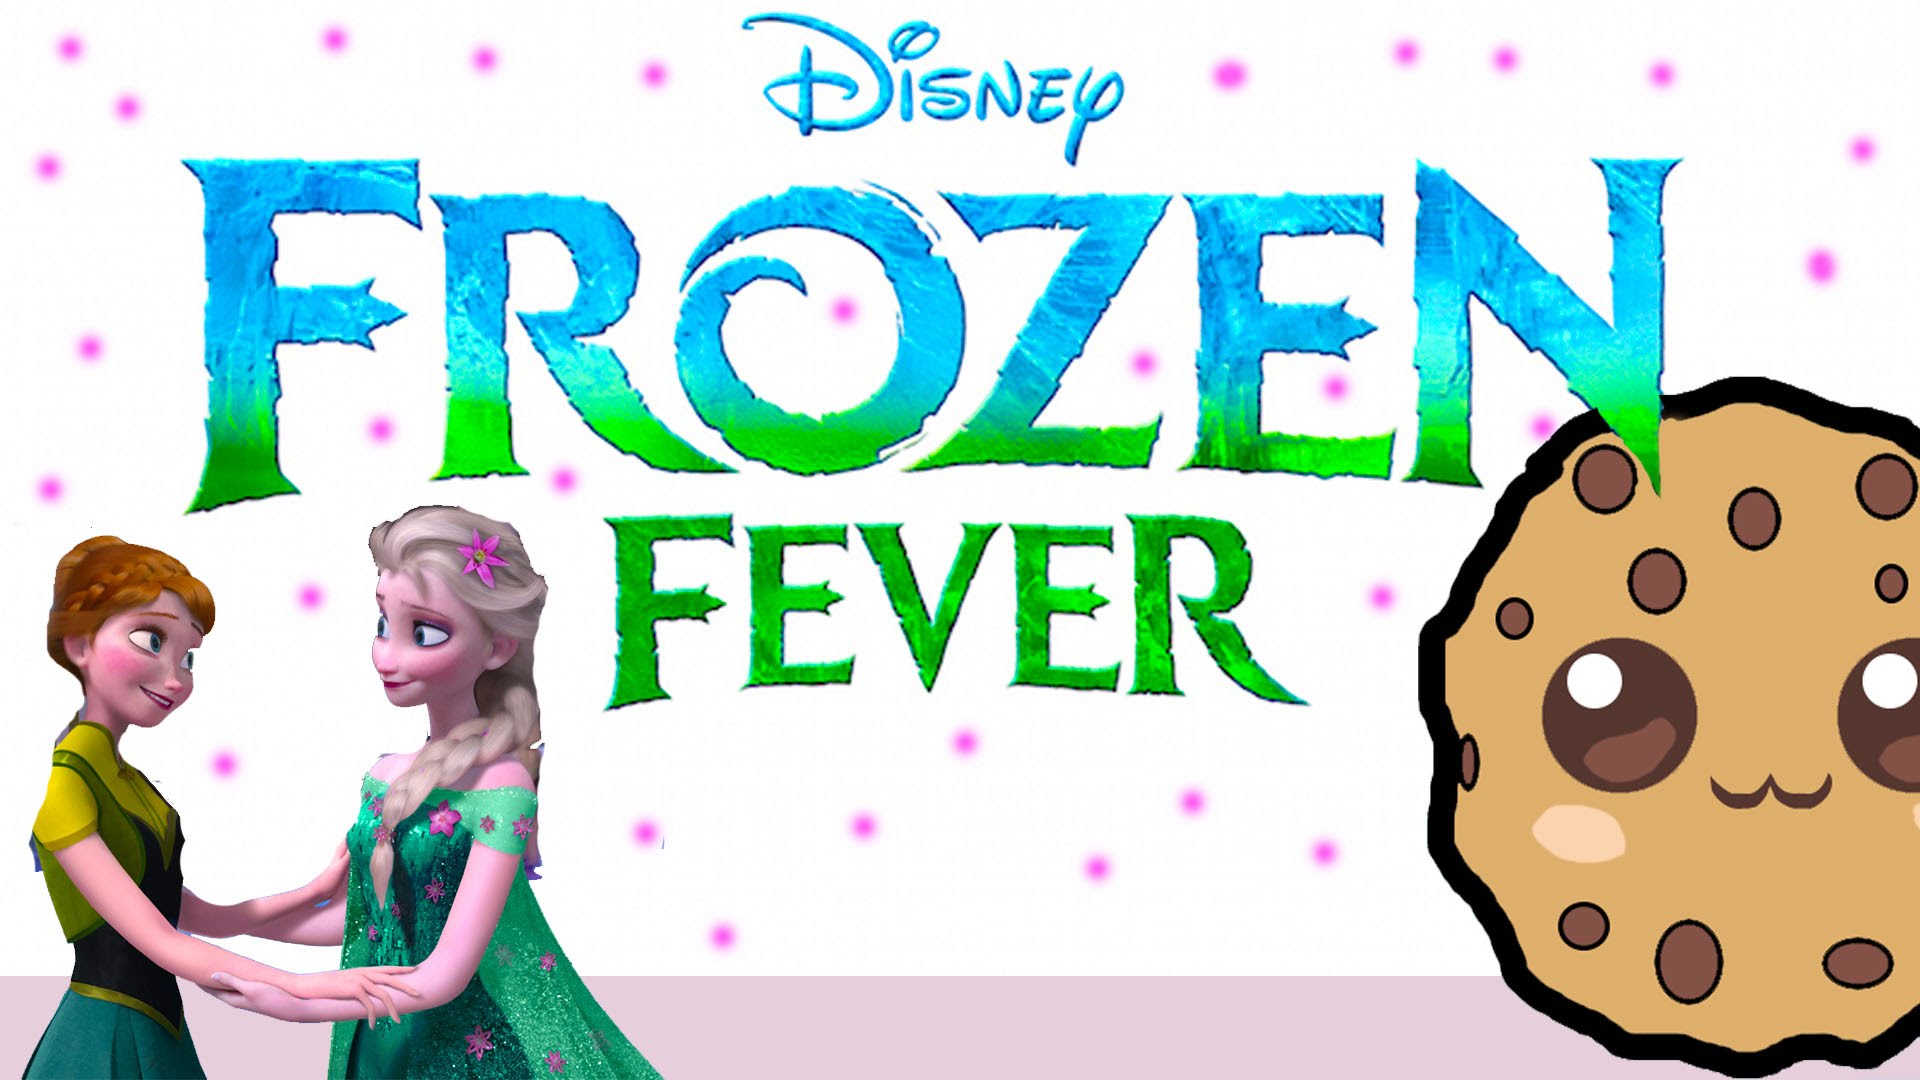 Frozen Fever Hd Wallpaper Background Image 1920x1080 Id